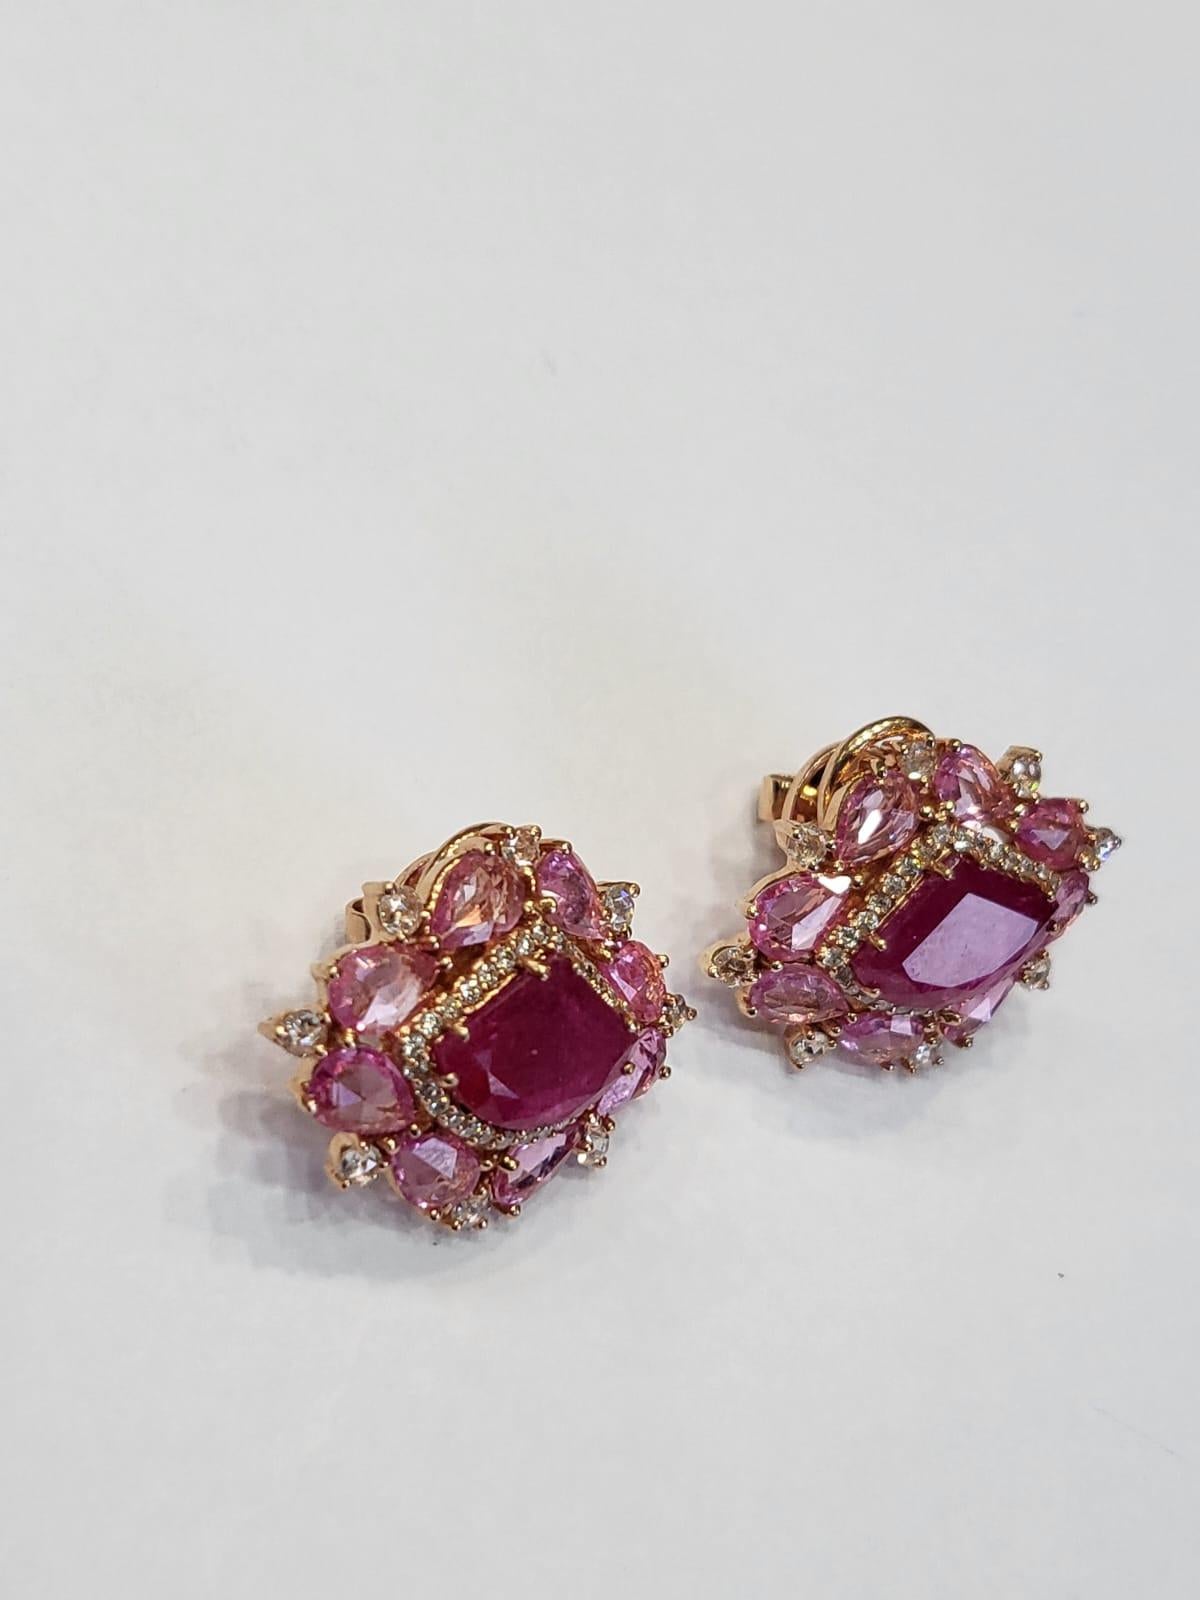 Women's or Men's Set in 18K Rose Gold, Mozambique Ruby, Pink Sapphires & Diamonds Stud Earrings